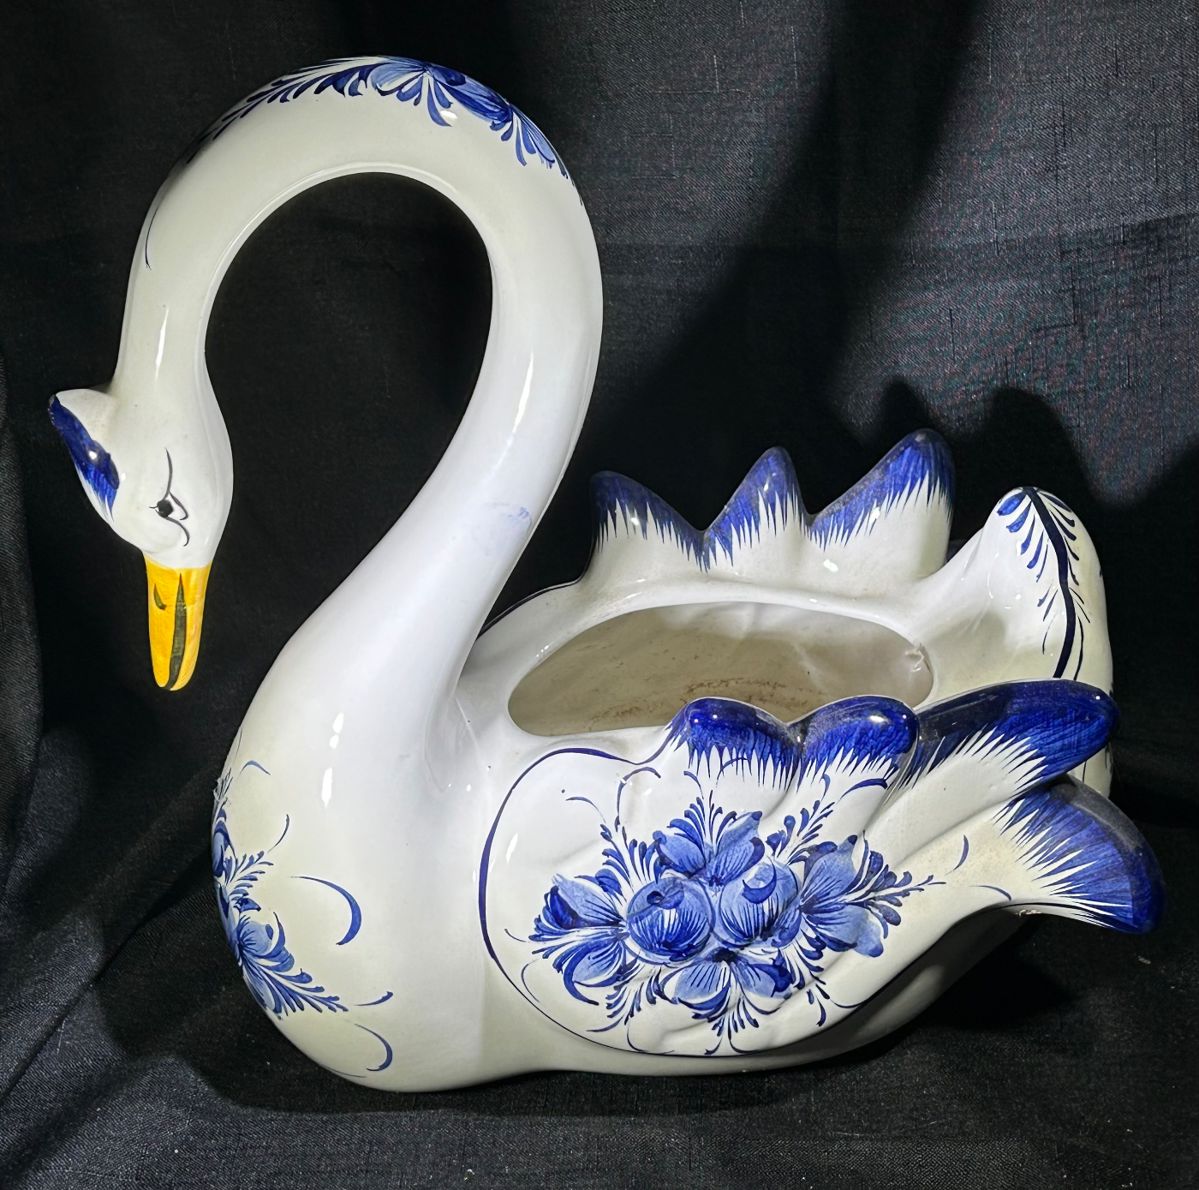 Hand painted swan planter. Yep, its blue and white!